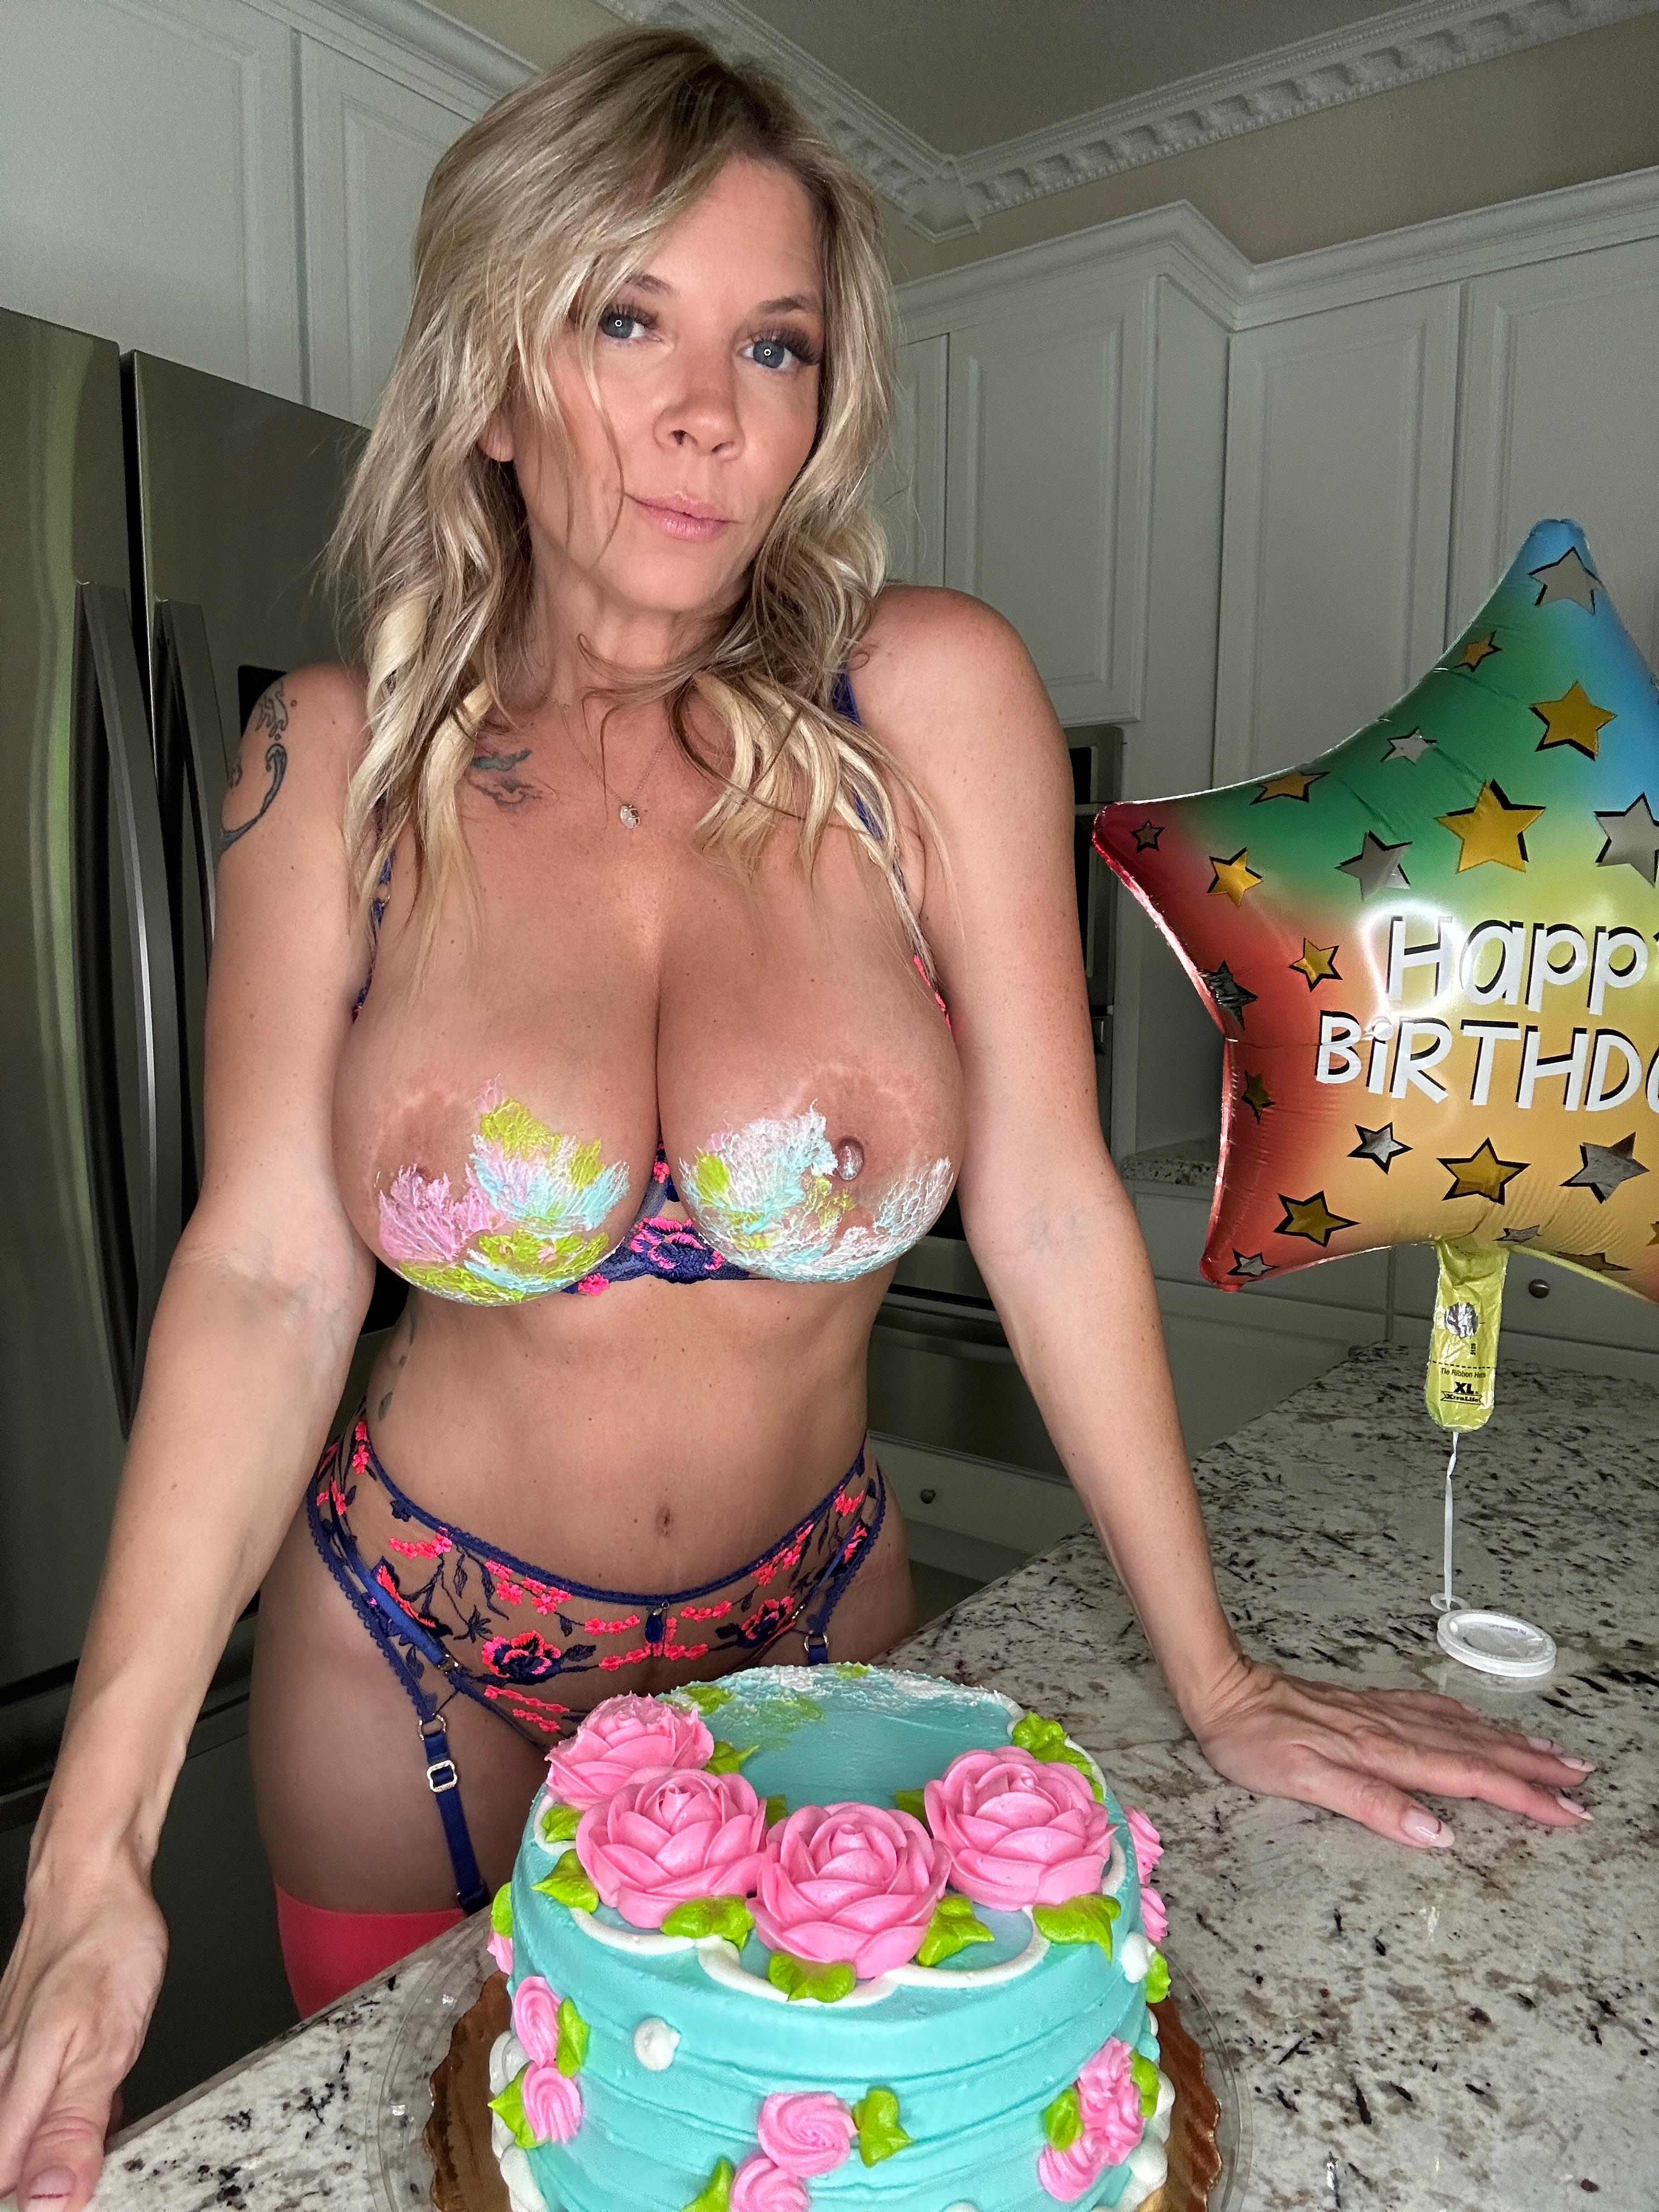 I think my titties got too close to the cake, welp happy 40th bday to me!